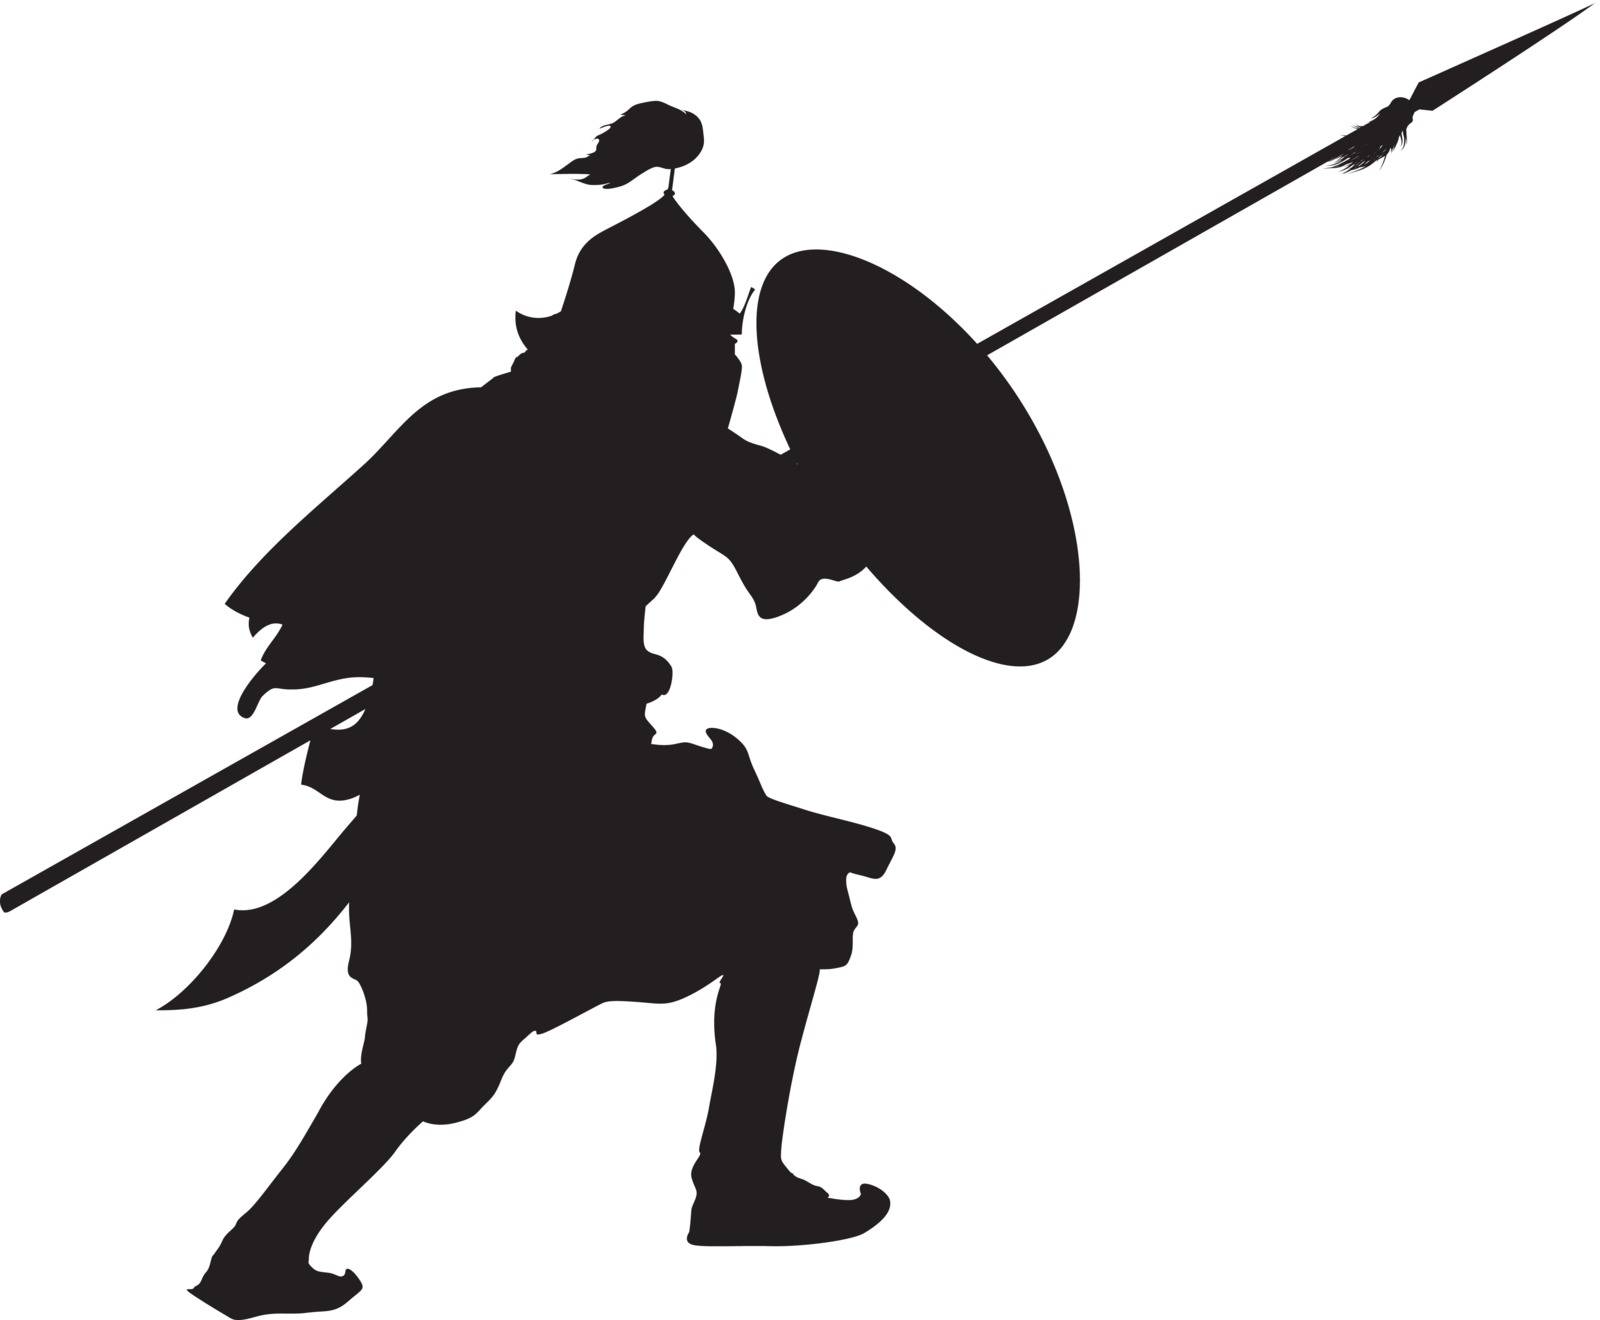 Oriental warrior with shield and spear detailed vector silhouette. EPS 8